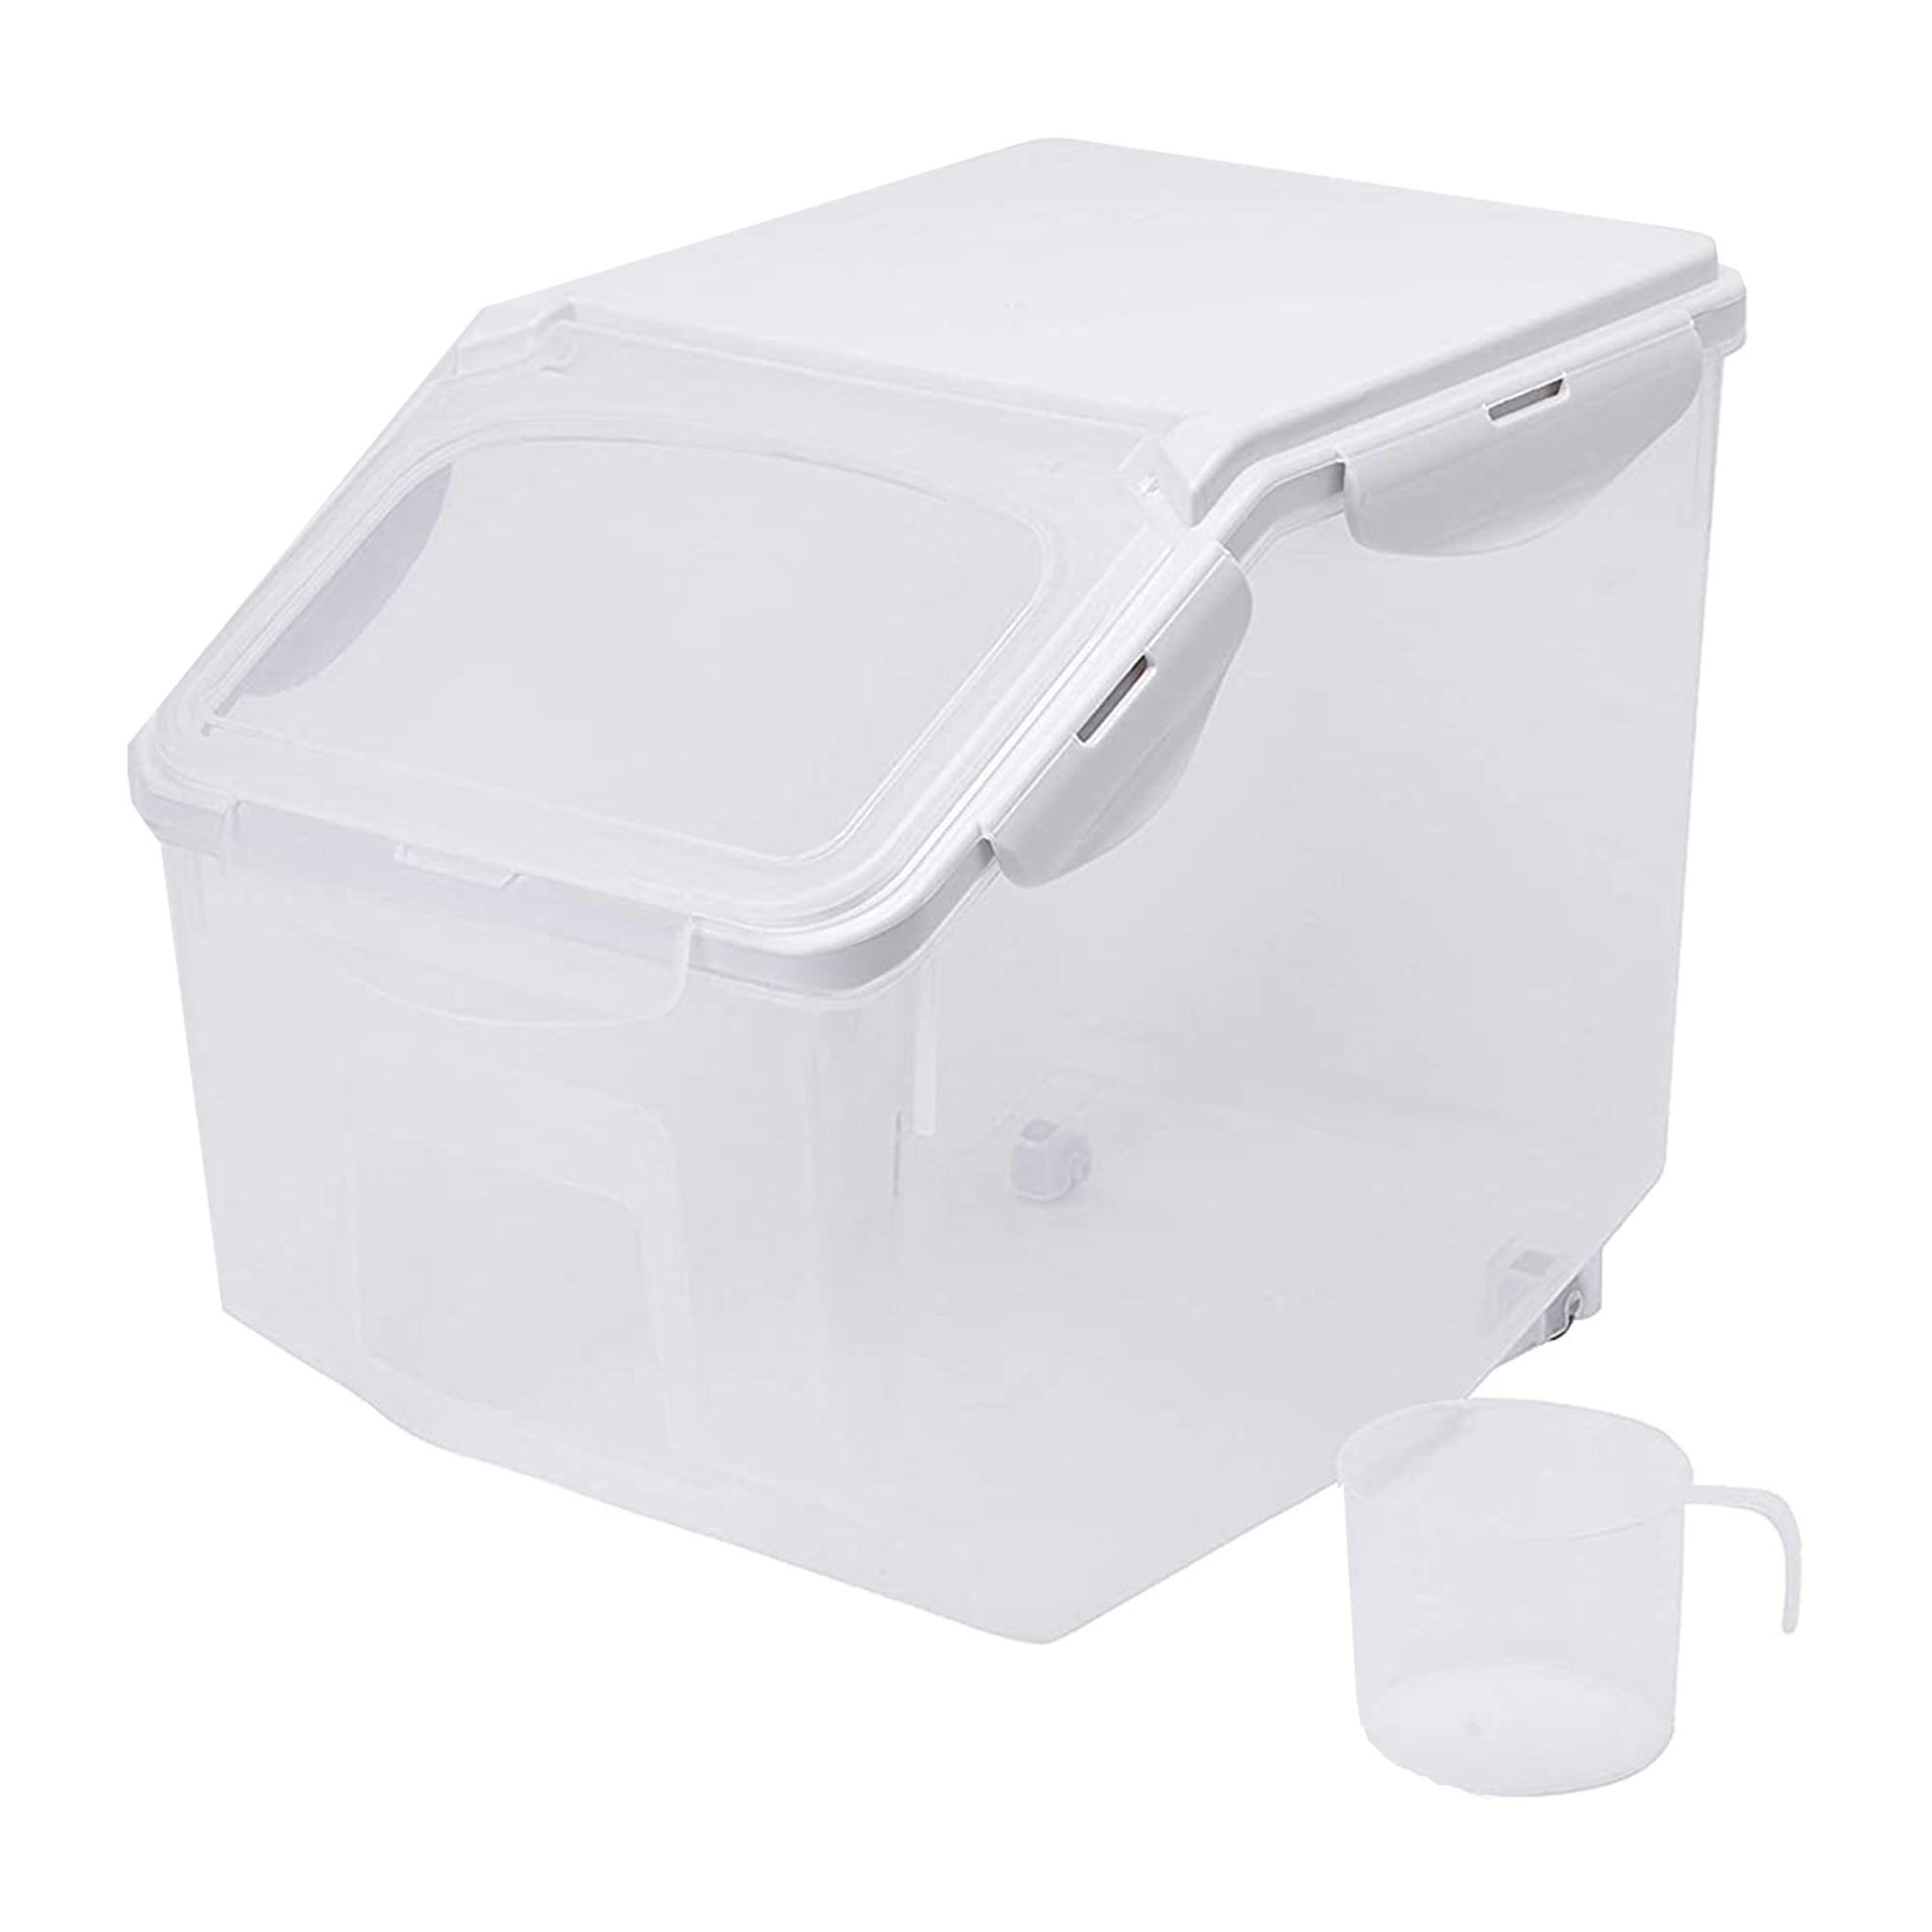 Basicwise White Large Plastic Storage Food Holder Containers with a  Measuring Cup and Wheels (Set of 2) QI004138L.2 - The Home Depot